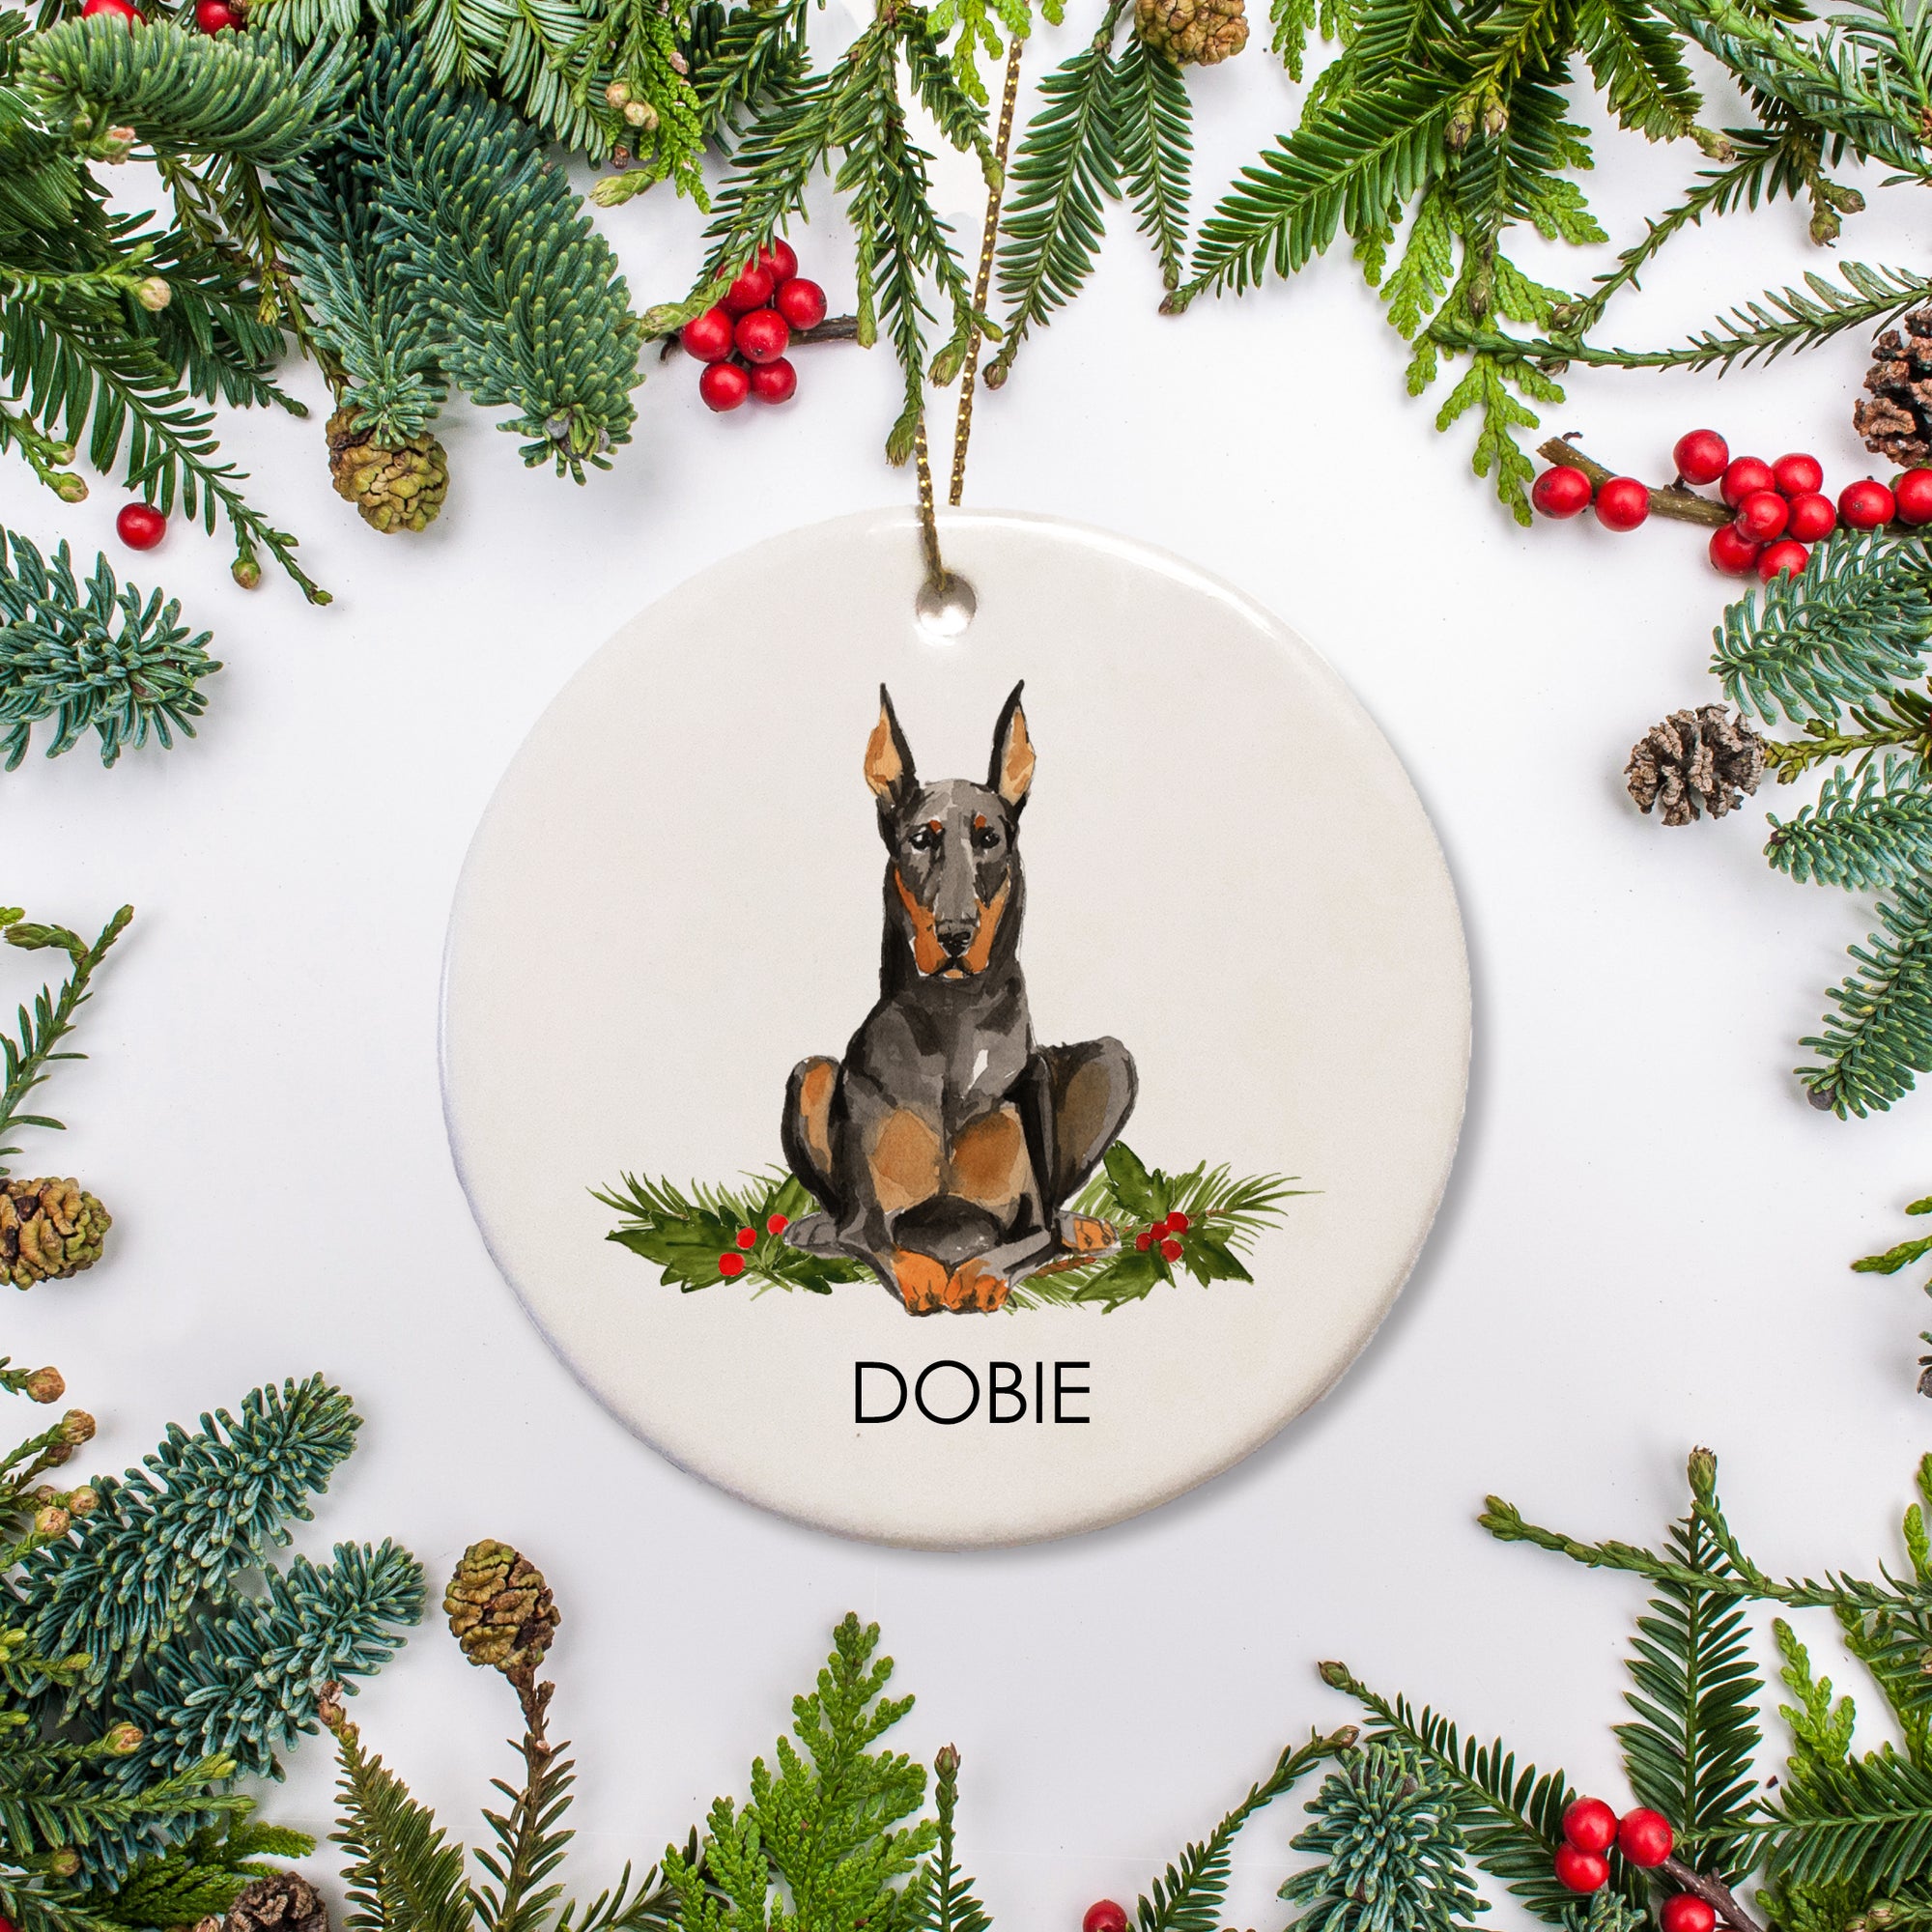 This custom ornament features your beloved Doberman Pincher and is personsonalized with their name. It makes a perfect keepsake gift, or a great way to celebrate your little dobie's first Christmas.